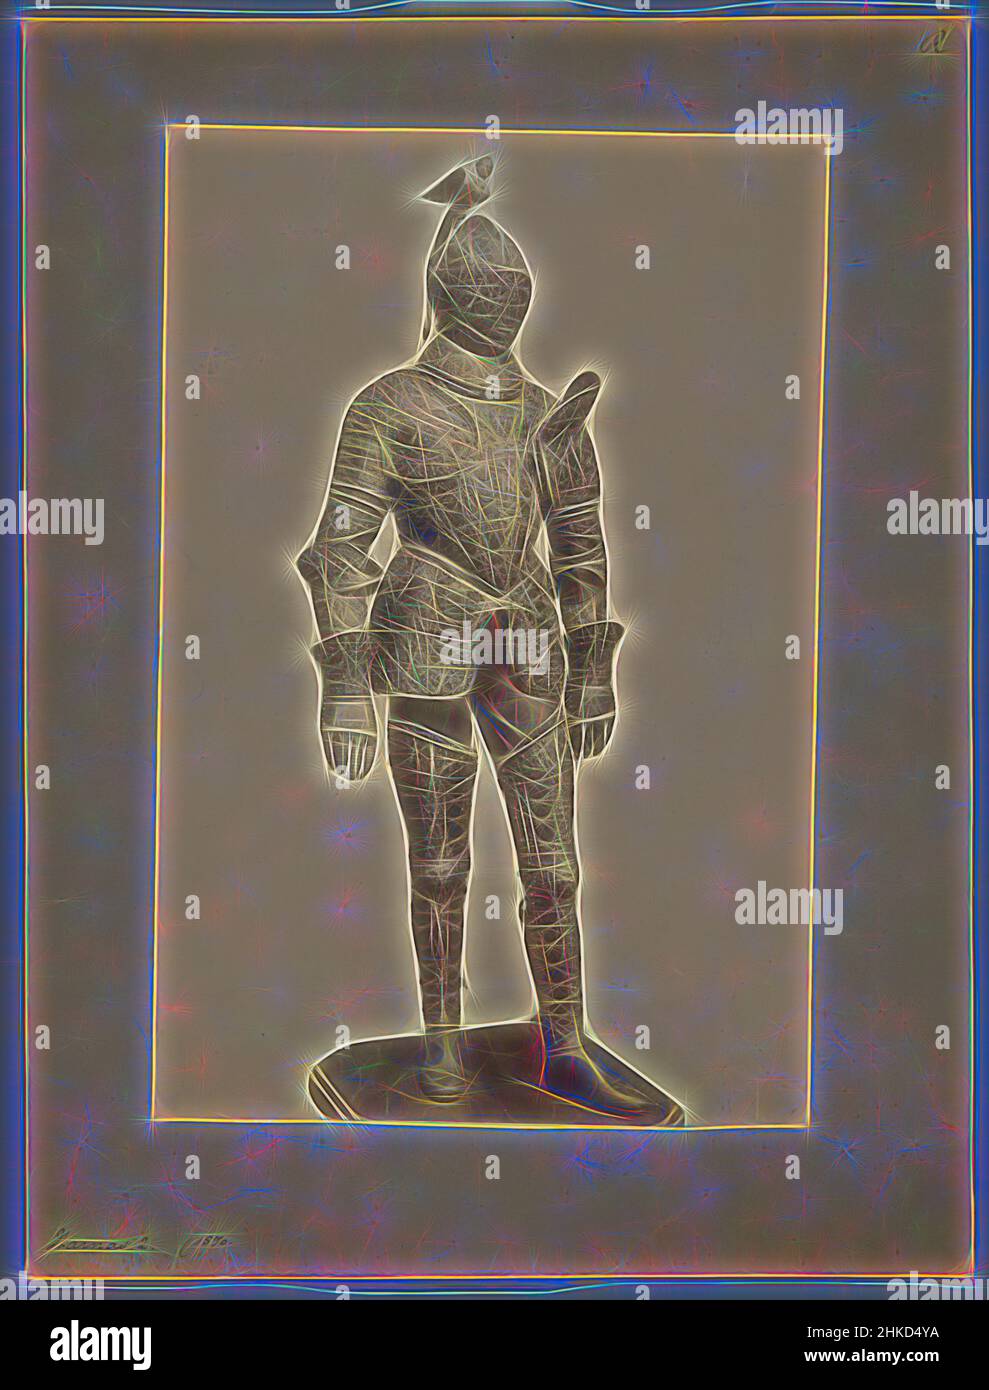 Inspired by Armor with Helmet, 1850 - 1900, albumen print, height 344 mm × width 259 mm, Reimagined by Artotop. Classic art reinvented with a modern twist. Design of warm cheerful glowing of brightness and light ray radiance. Photography inspired by surrealism and futurism, embracing dynamic energy of modern technology, movement, speed and revolutionize culture Stock Photo